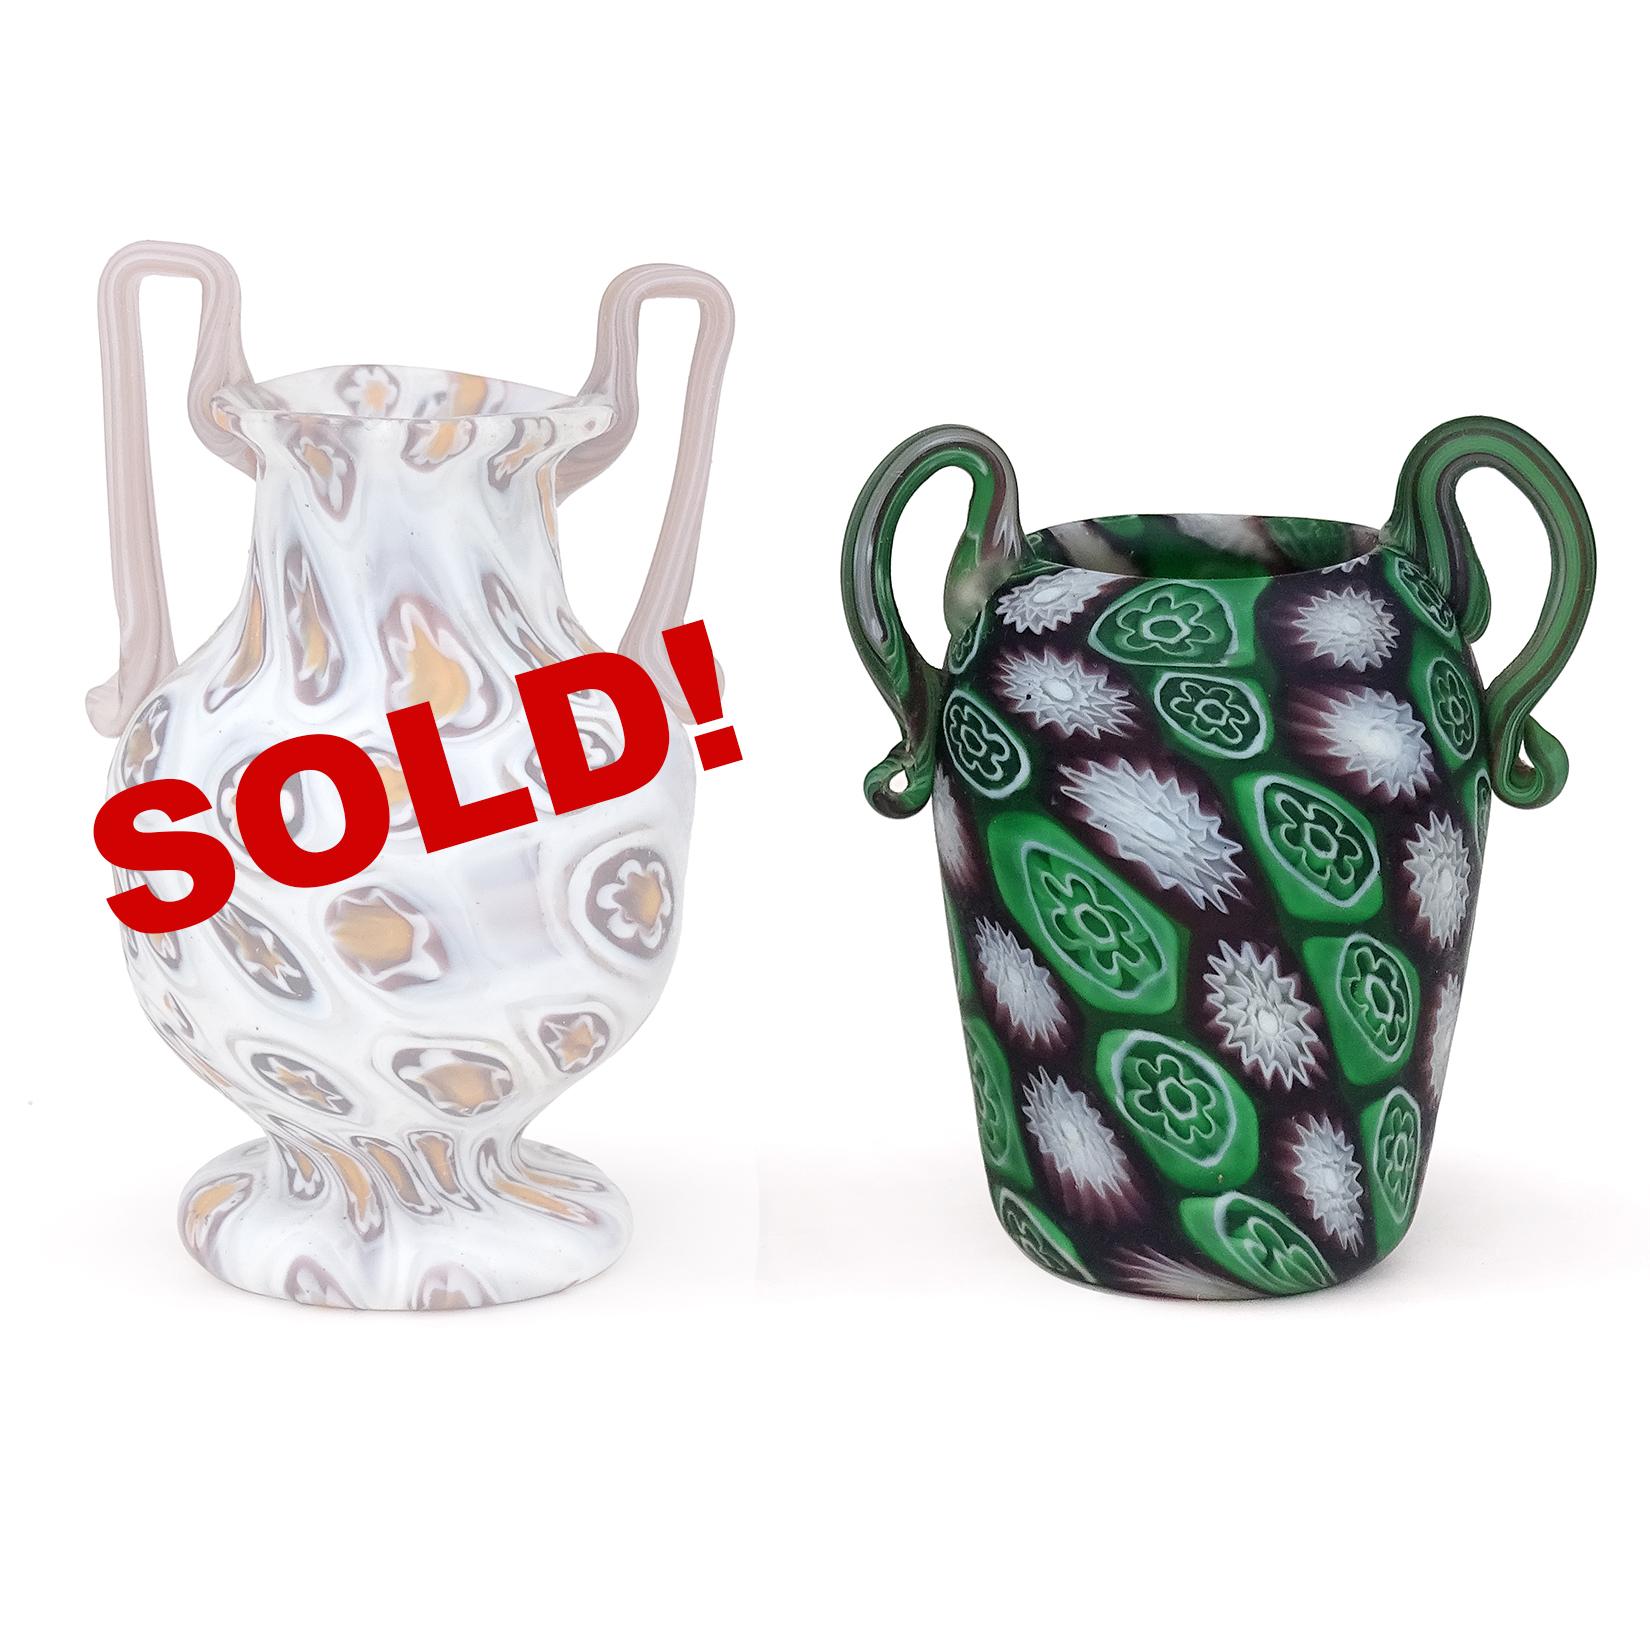 ONLY 1 Left! Beautiful antique Murano hand blown millefiori flower Mosaic Italian art glass decorative double handles cabinet vase. Documented to the Fratelli Toso company, circa 1900-1920. The vase has an early, and very unusual design and color